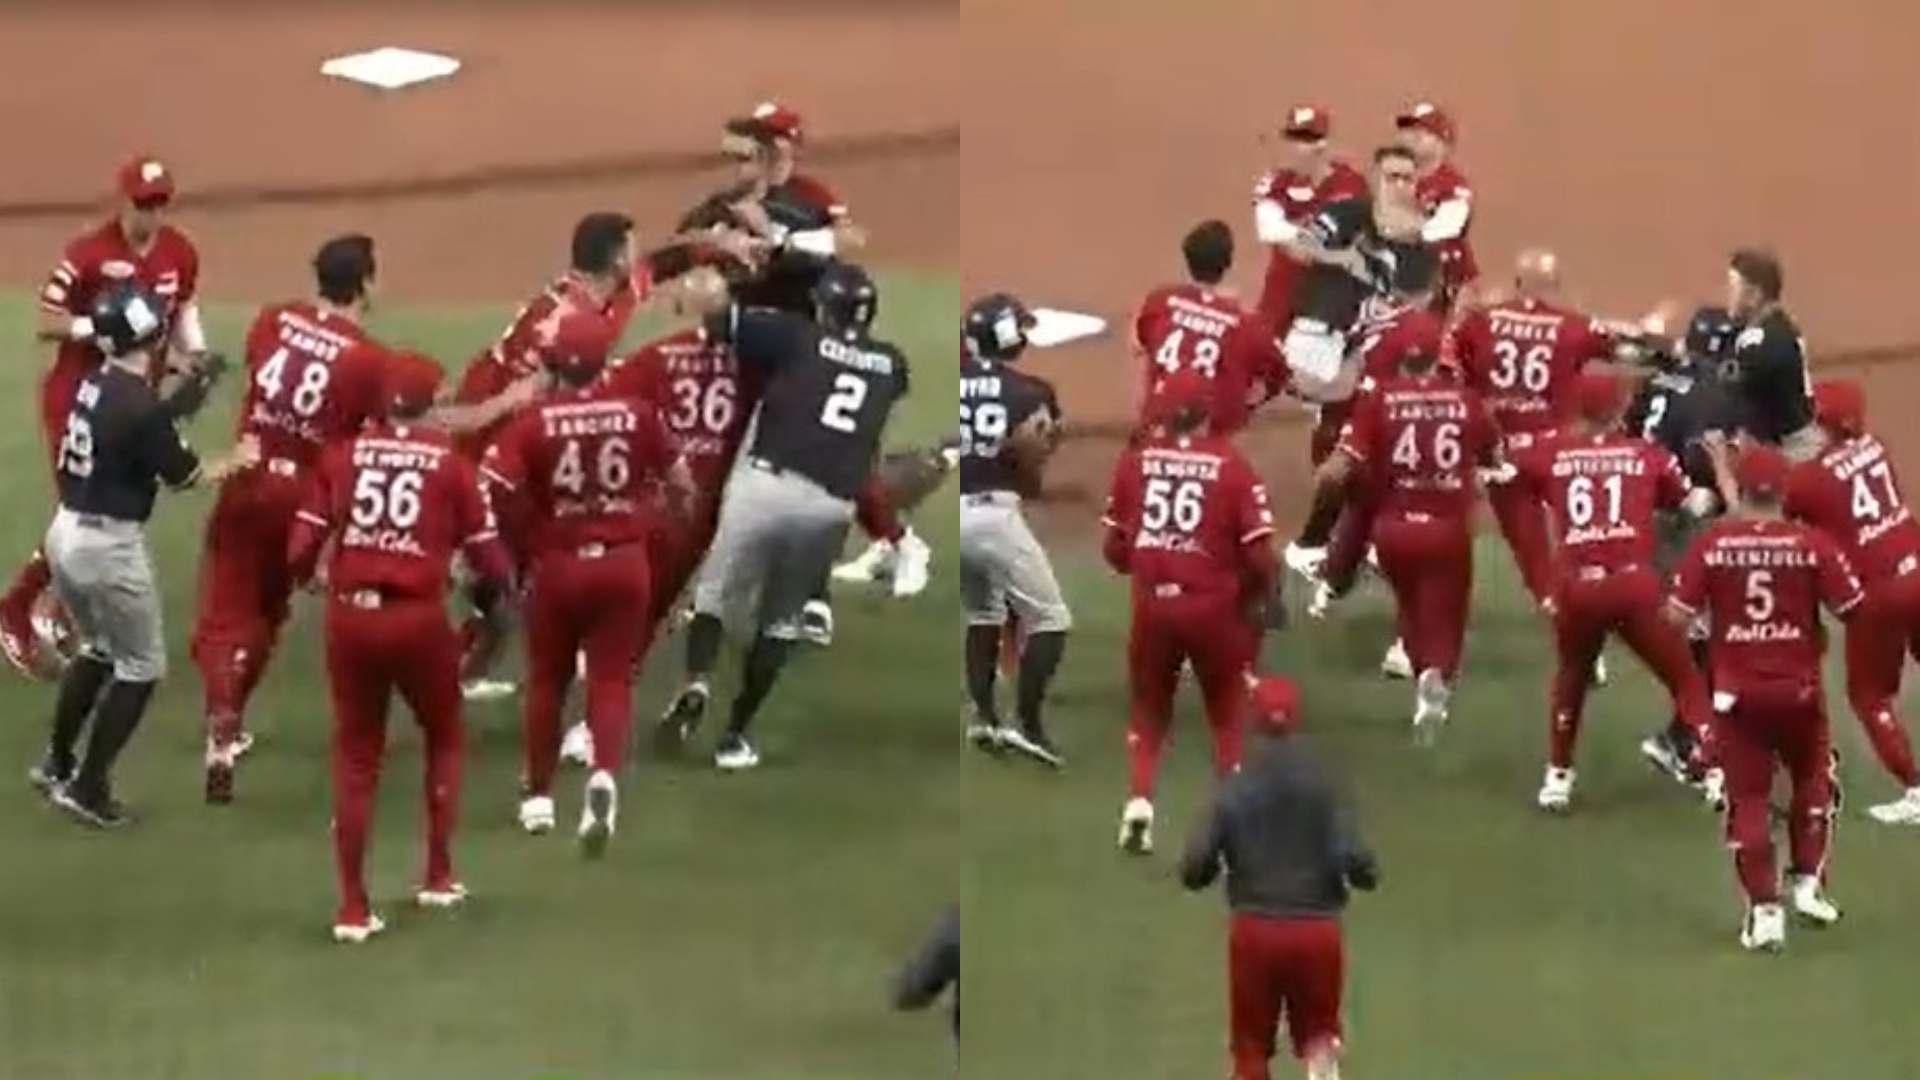 LMB Diablos Rojos and Guerreros staged a pitched fight in